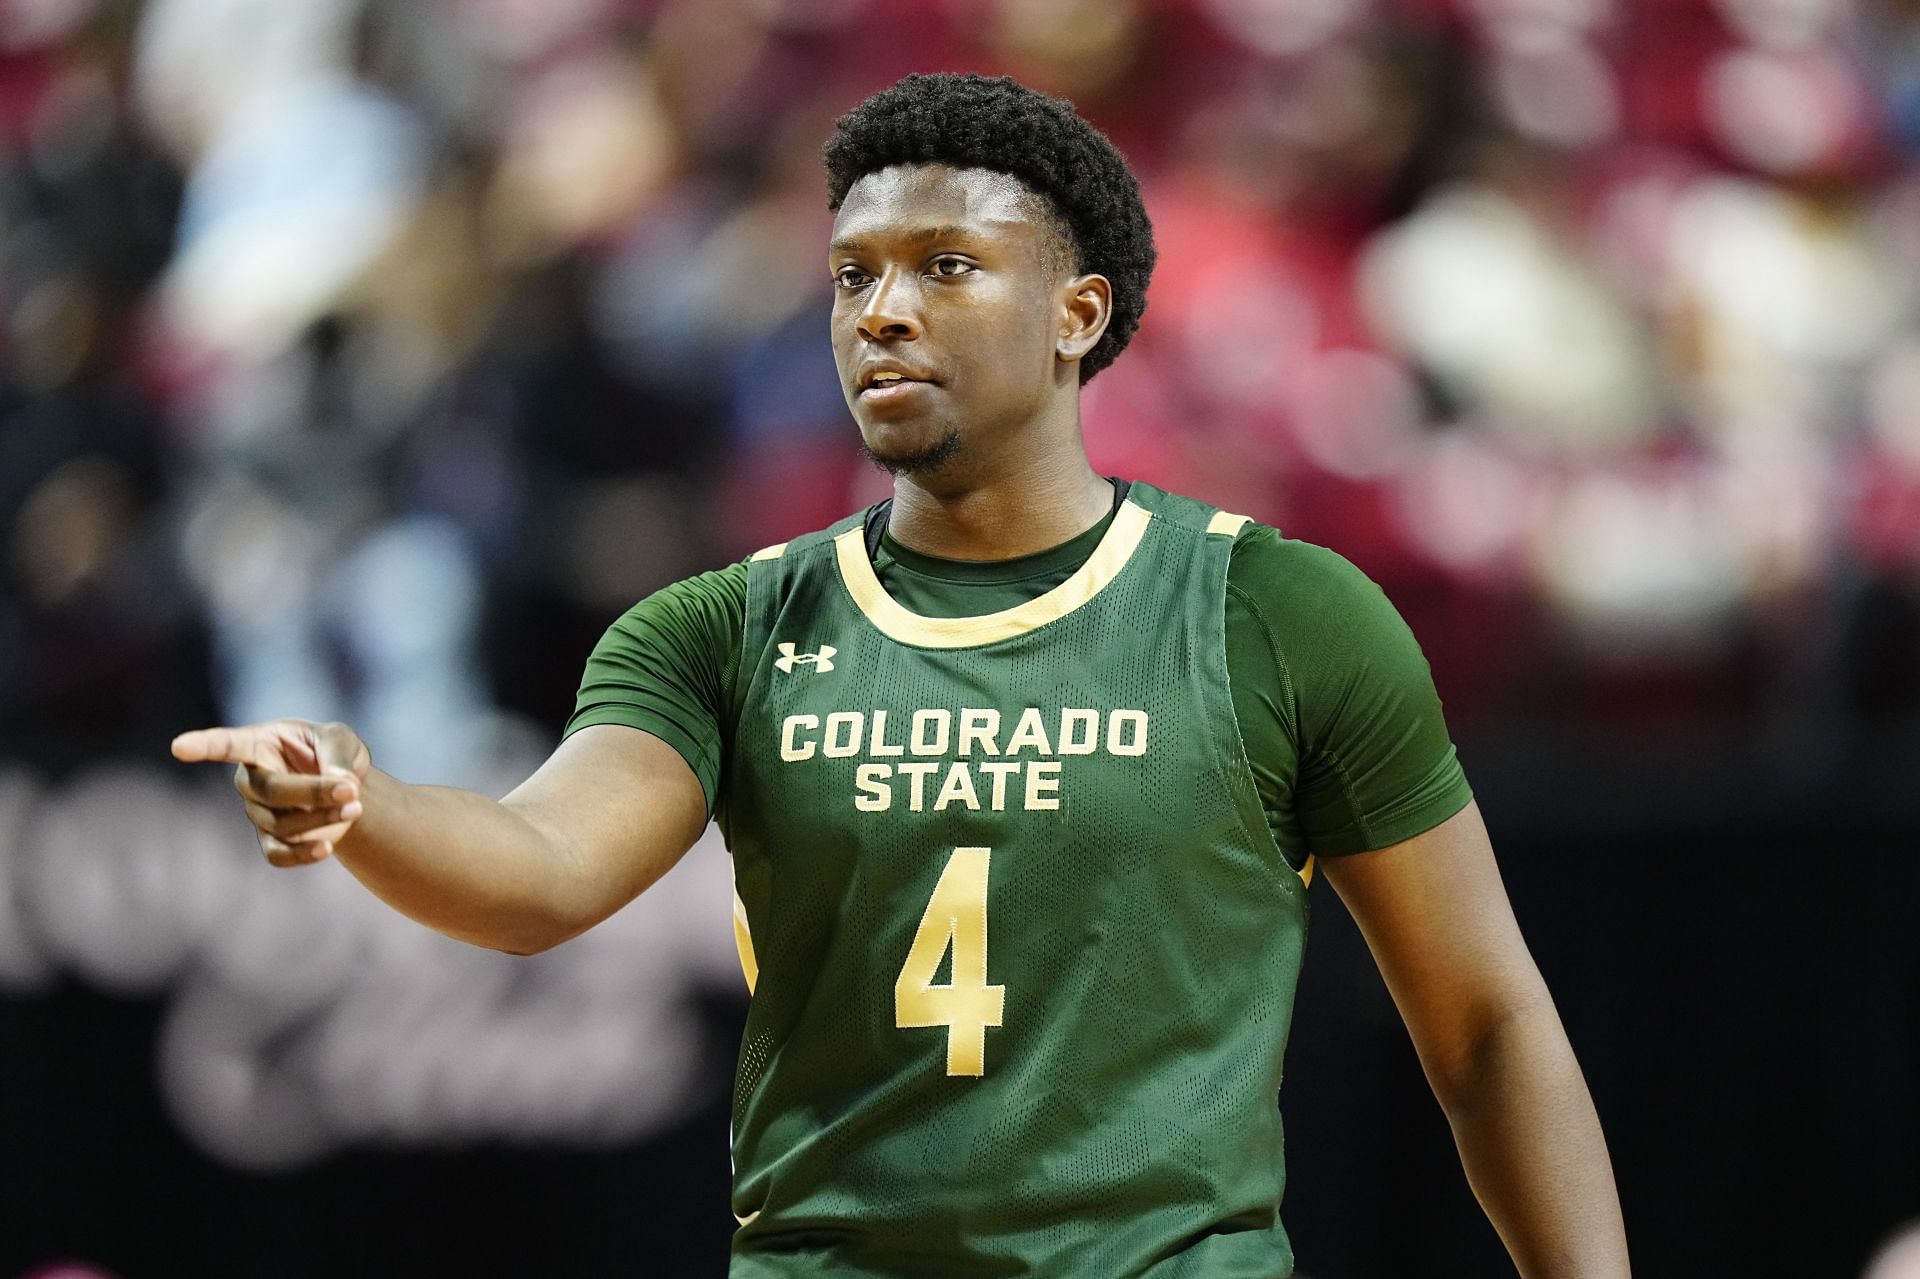 Isaiah Stevens and Colorado State had a tough week and may fall out of the top 25.